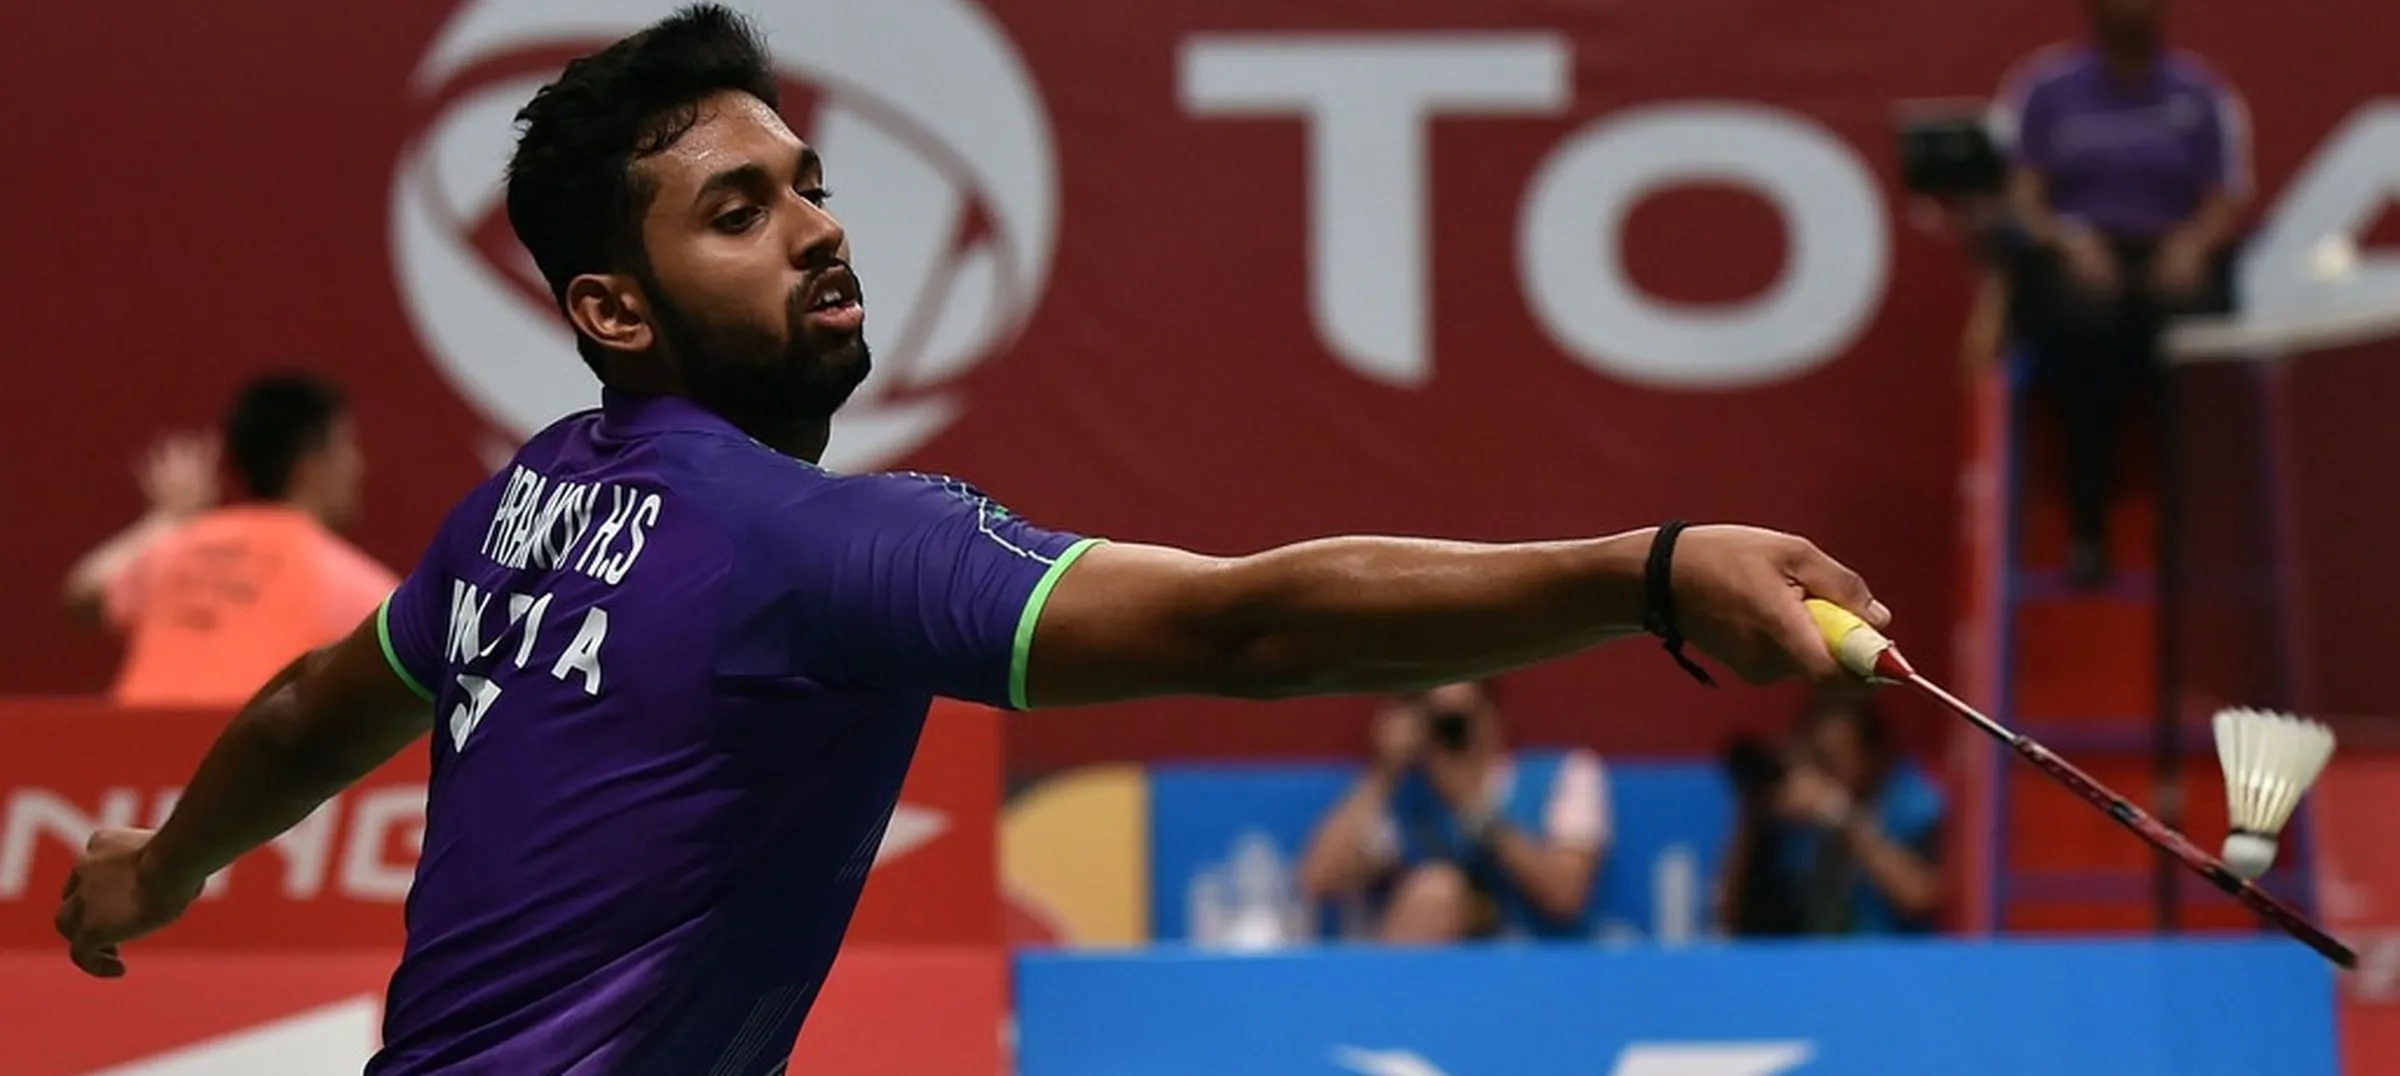 BWF World Tour Finals HS Prannoy loses to Chinas Lu GZ, crashes out of tournament